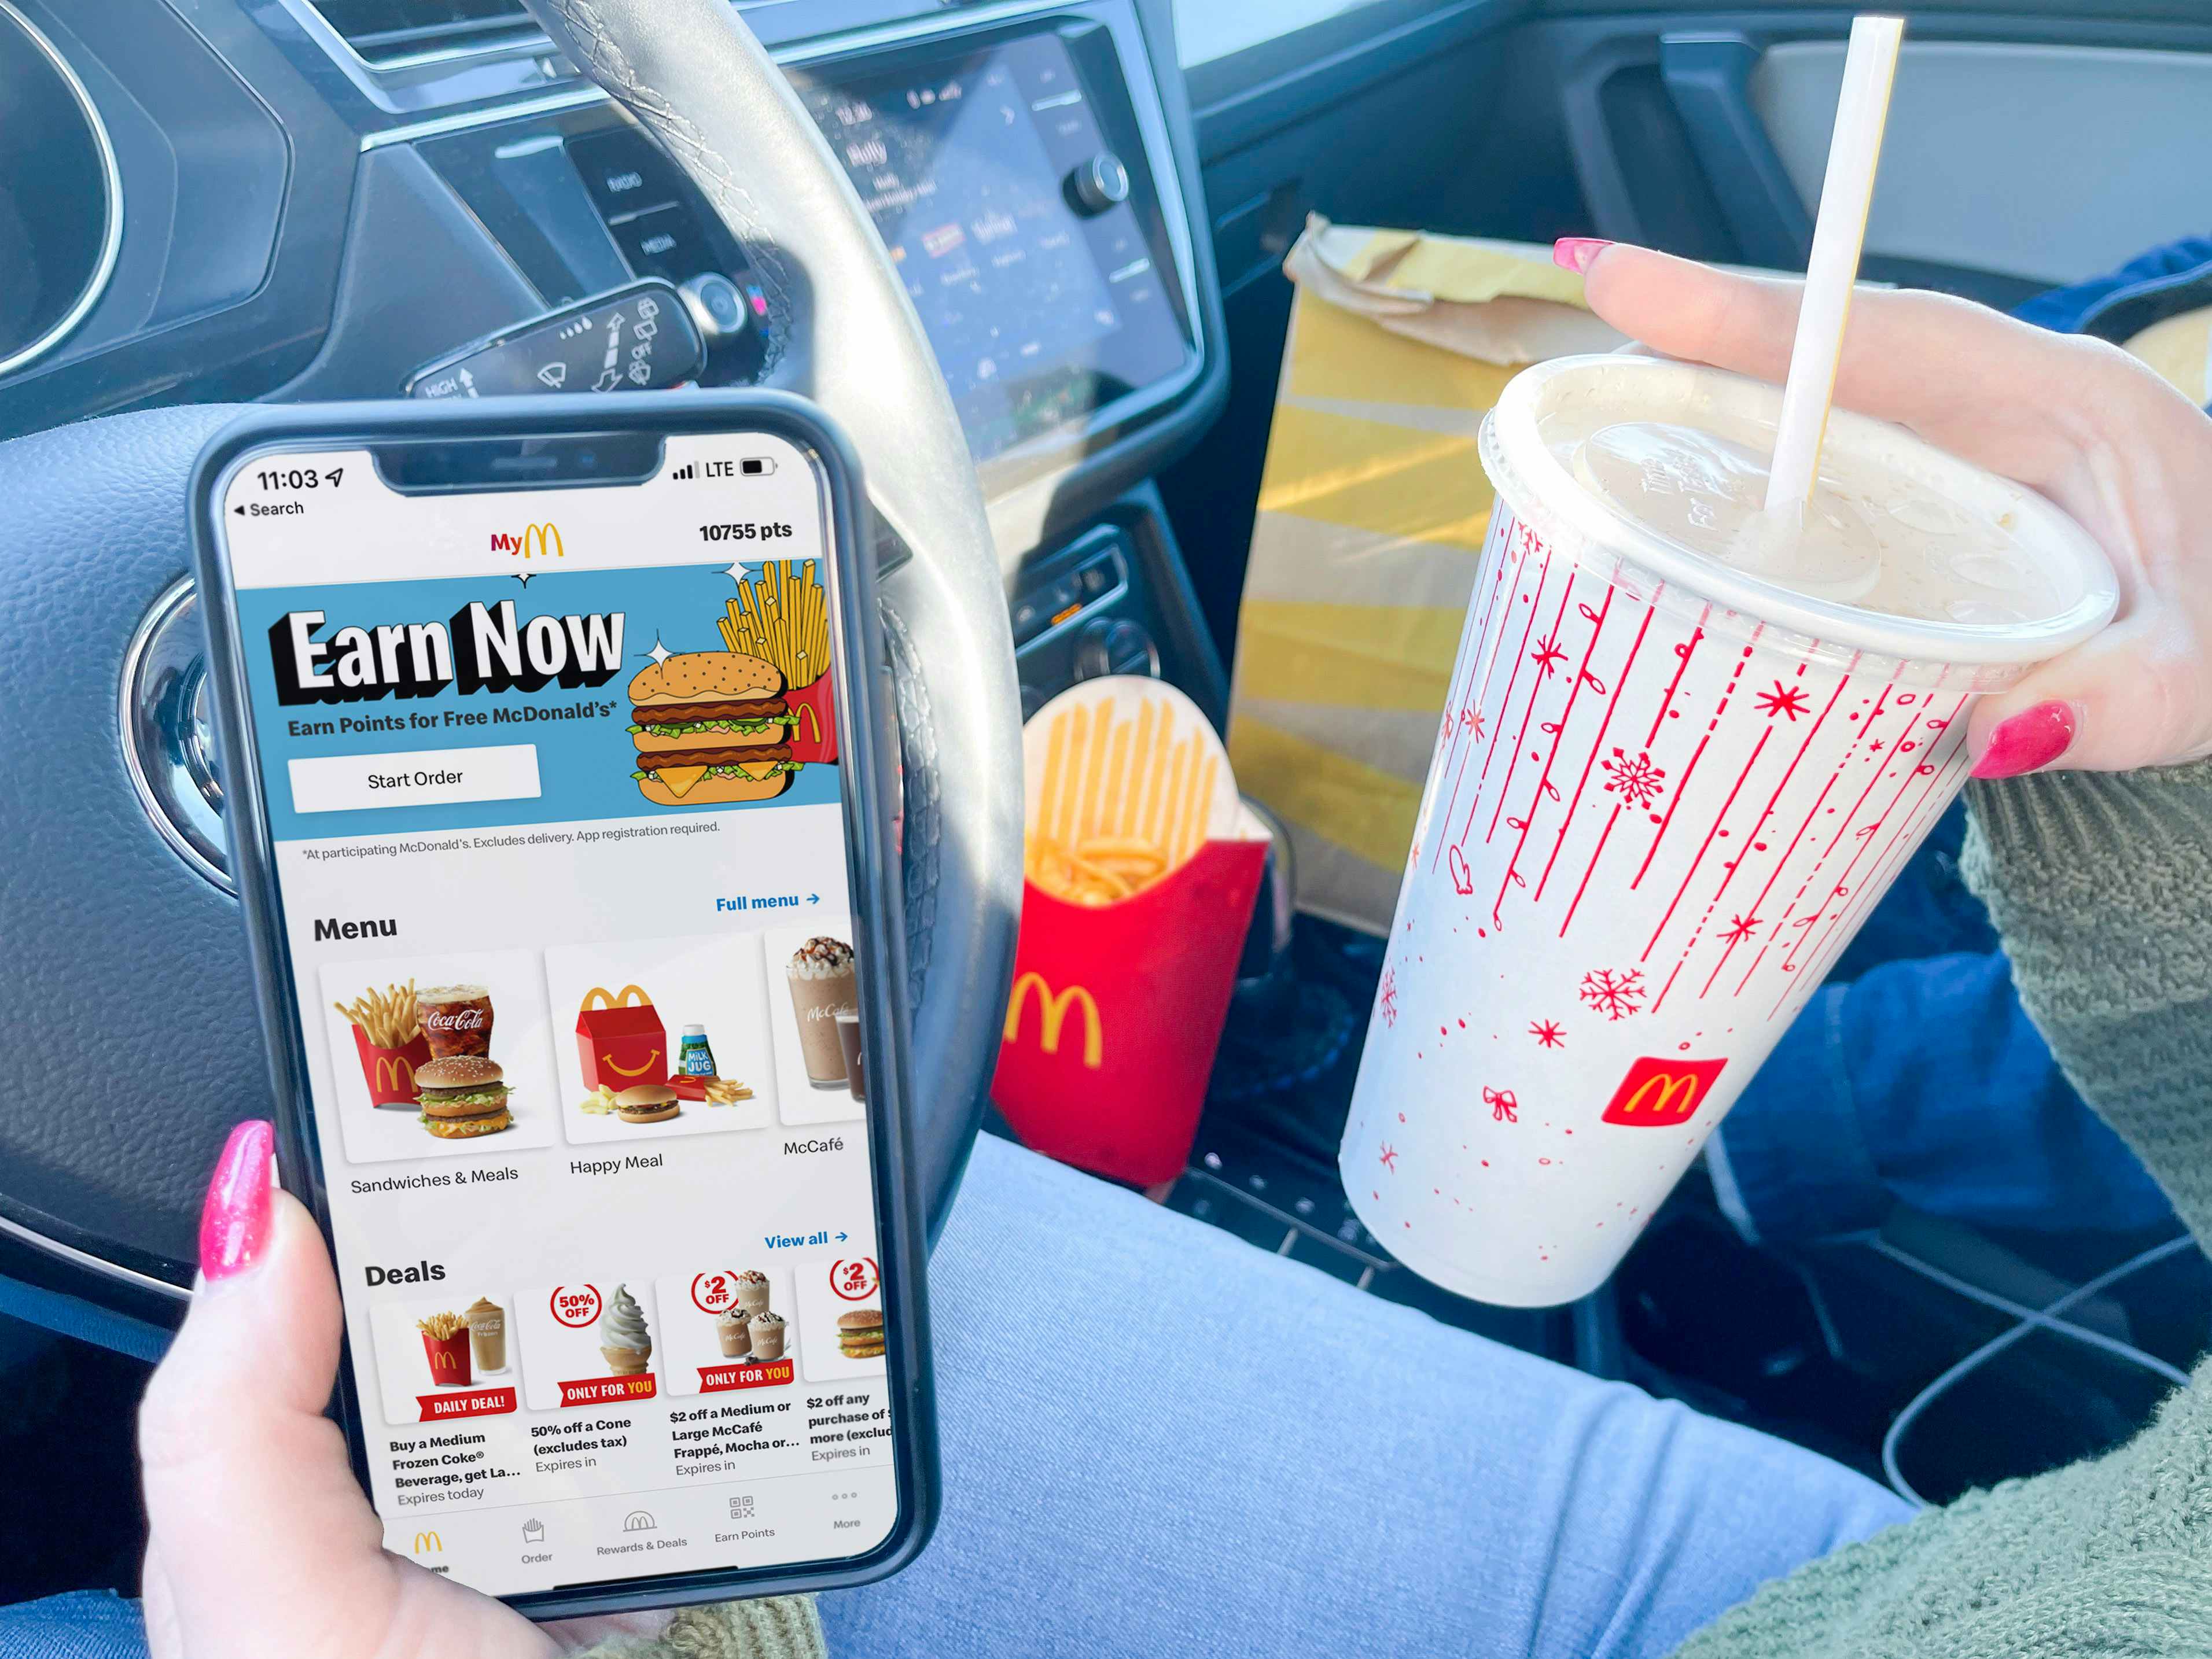 A person sitting in a car holding an iPhone which is open to the McDonald's mobile app Menu in one hand, and a McDonalds fountain drink in the other hand. On the passenger's seat in the background, there is a box of McDonald's fries and a McDonald's take out bag.